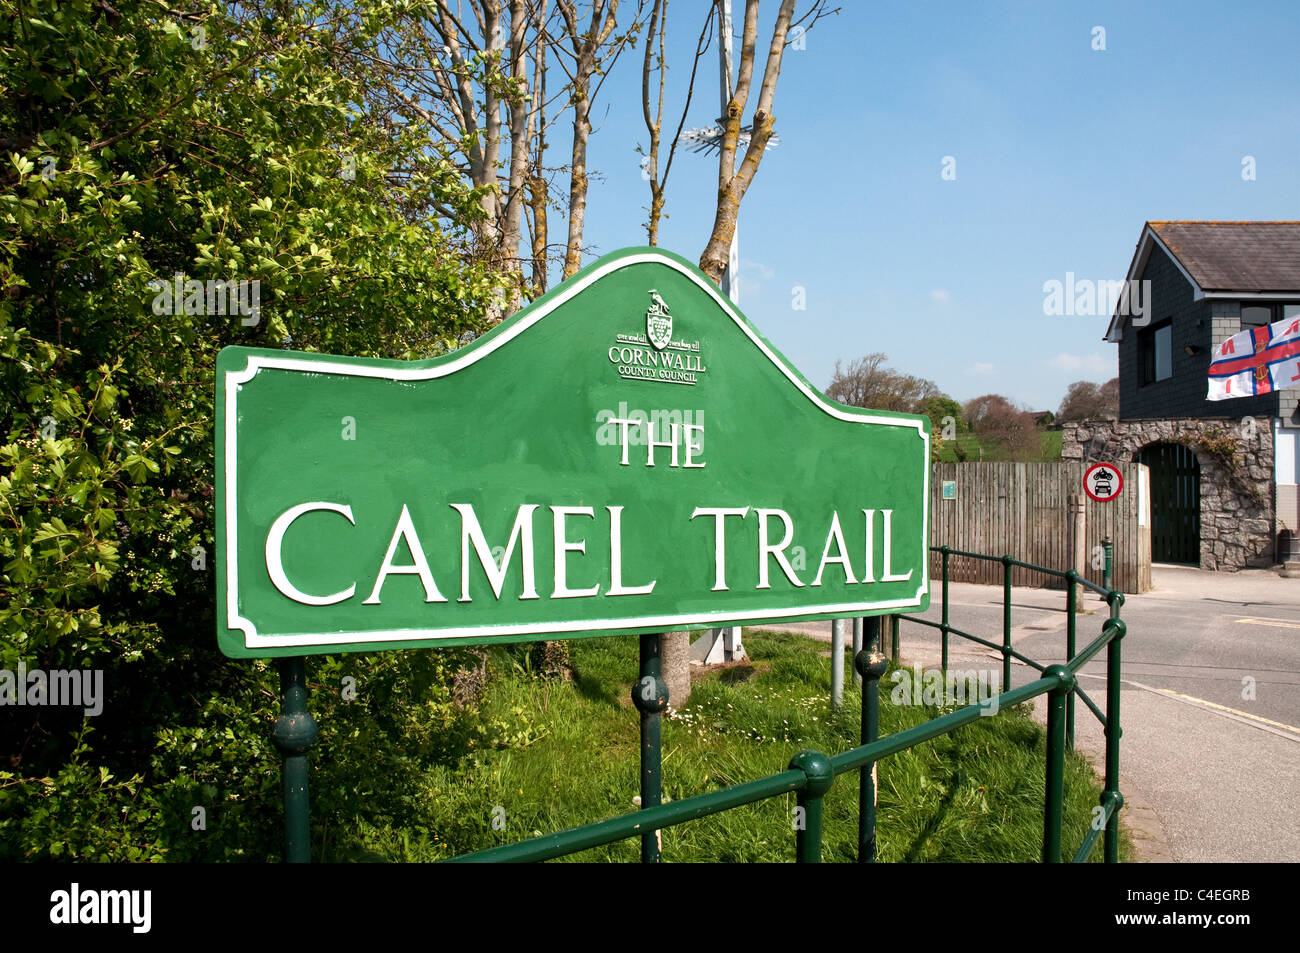 The Camel Trail sign at Wadebridge in Cornwall, UK Stock Photo